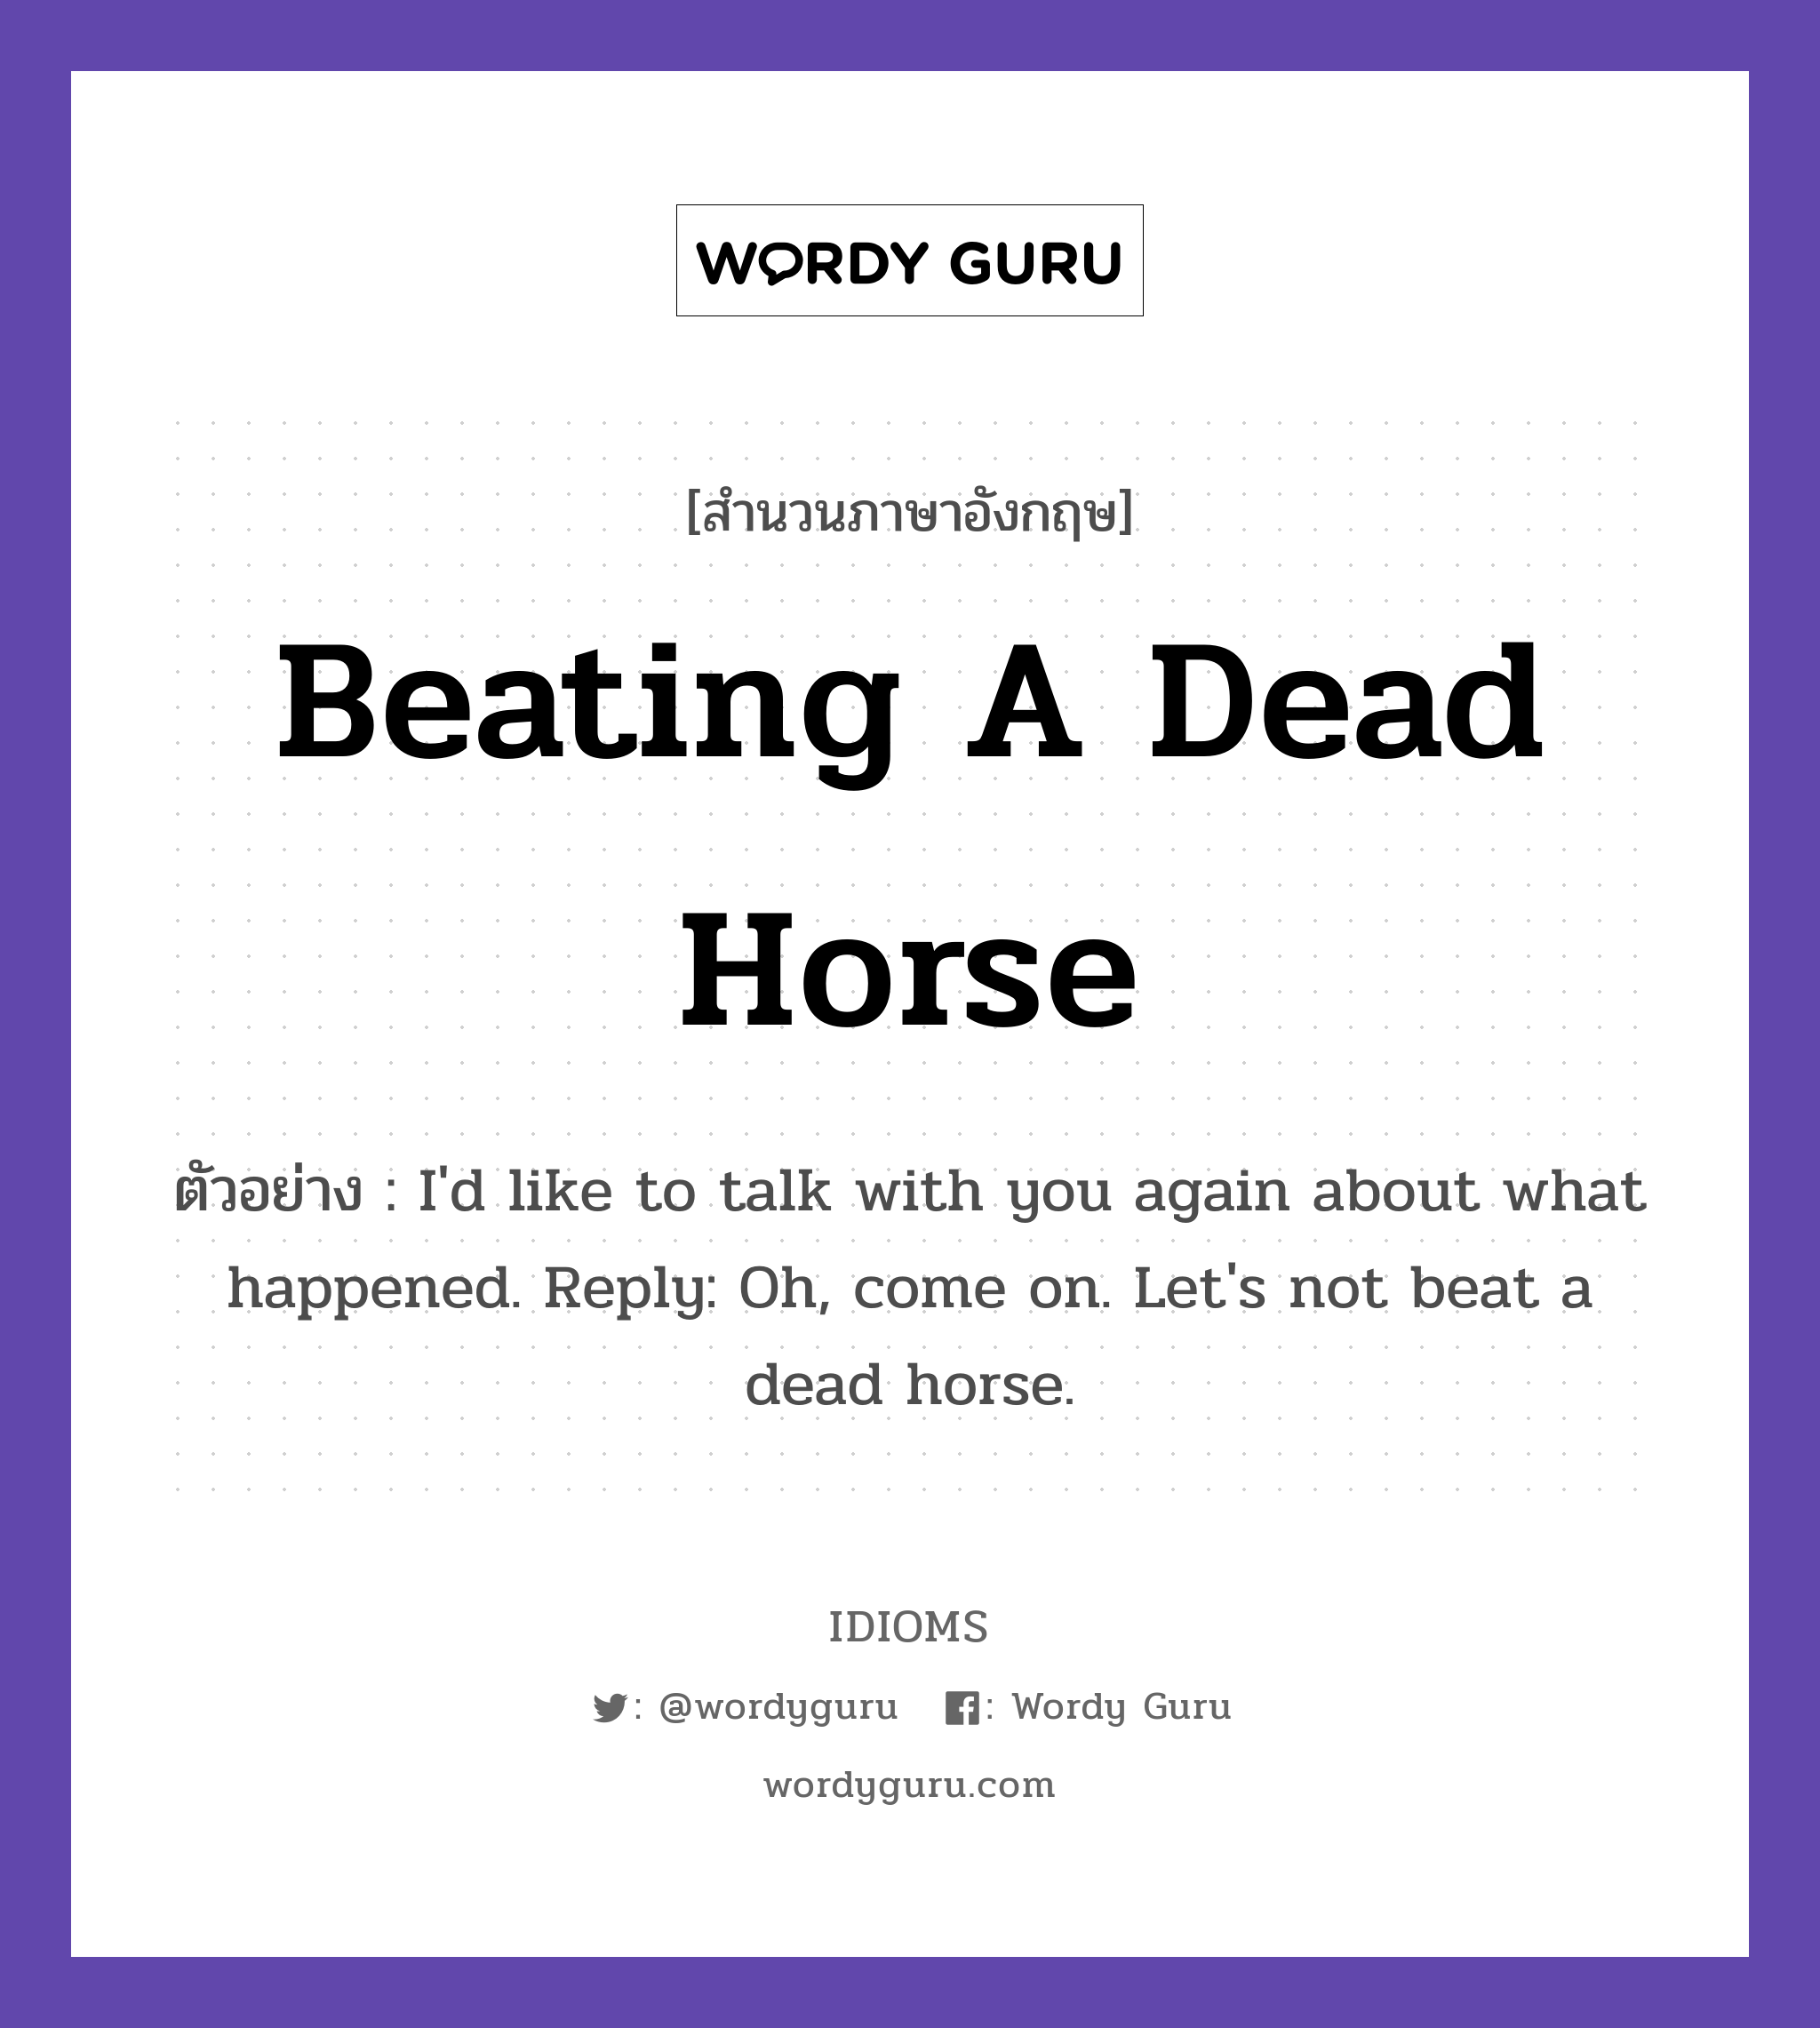 Beating A Dead Horse แปลว่า?, สำนวนภาษาอังกฤษ Beating A Dead Horse ตัวอย่าง I'd like to talk with you again about what happened. Reply: Oh, come on. Let's not beat a dead horse.